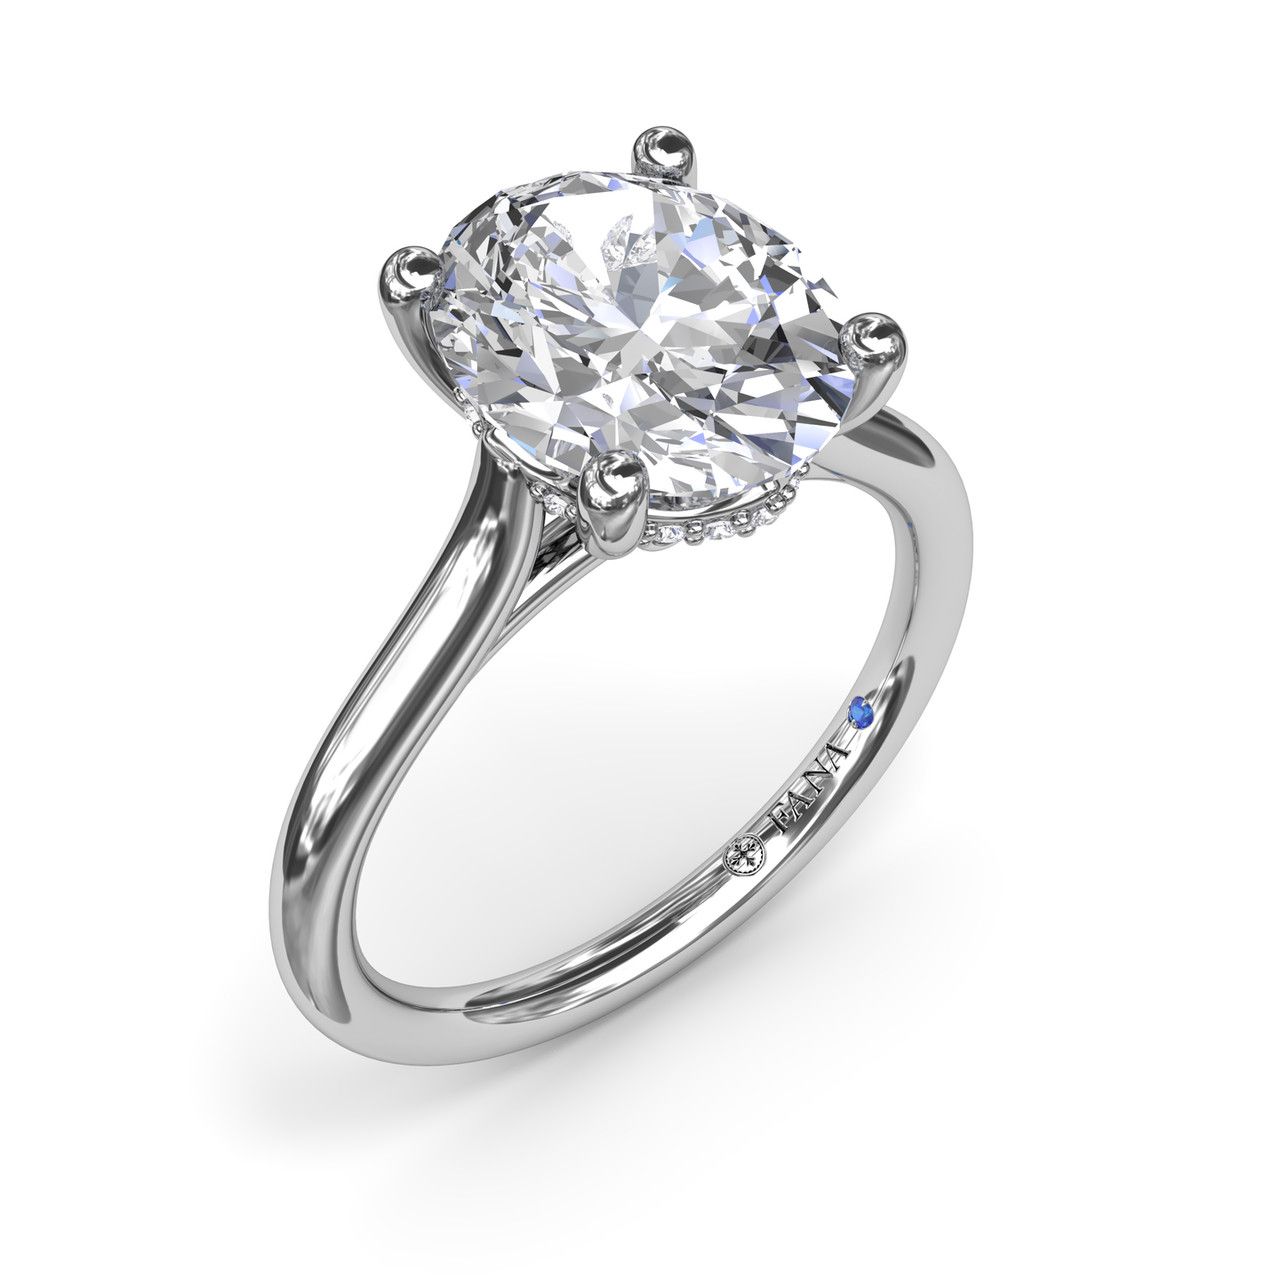 14K WHITE GOLD SOLITAIRE SEMI-MOUNT RING SIZE 6.5 WITH 16=0.08TW ROUND G-H VS2-SI1 DIAMONDS AND ONE ROUND BLUE SAPPHIRE   (3.72 GRAMS)